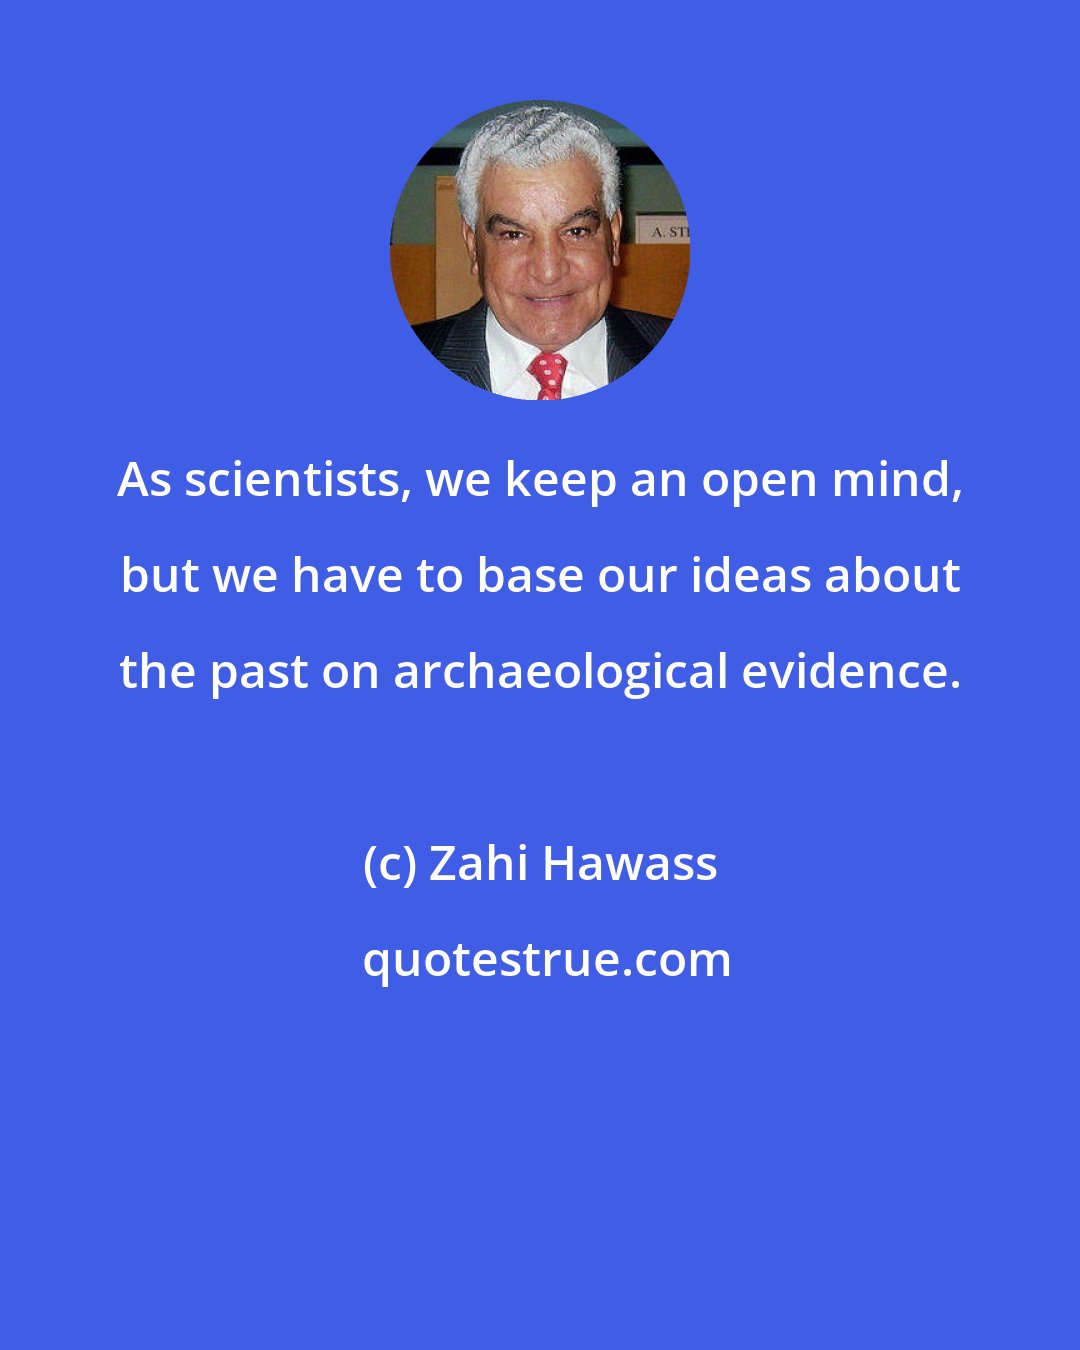 Zahi Hawass: As scientists, we keep an open mind, but we have to base our ideas about the past on archaeological evidence.